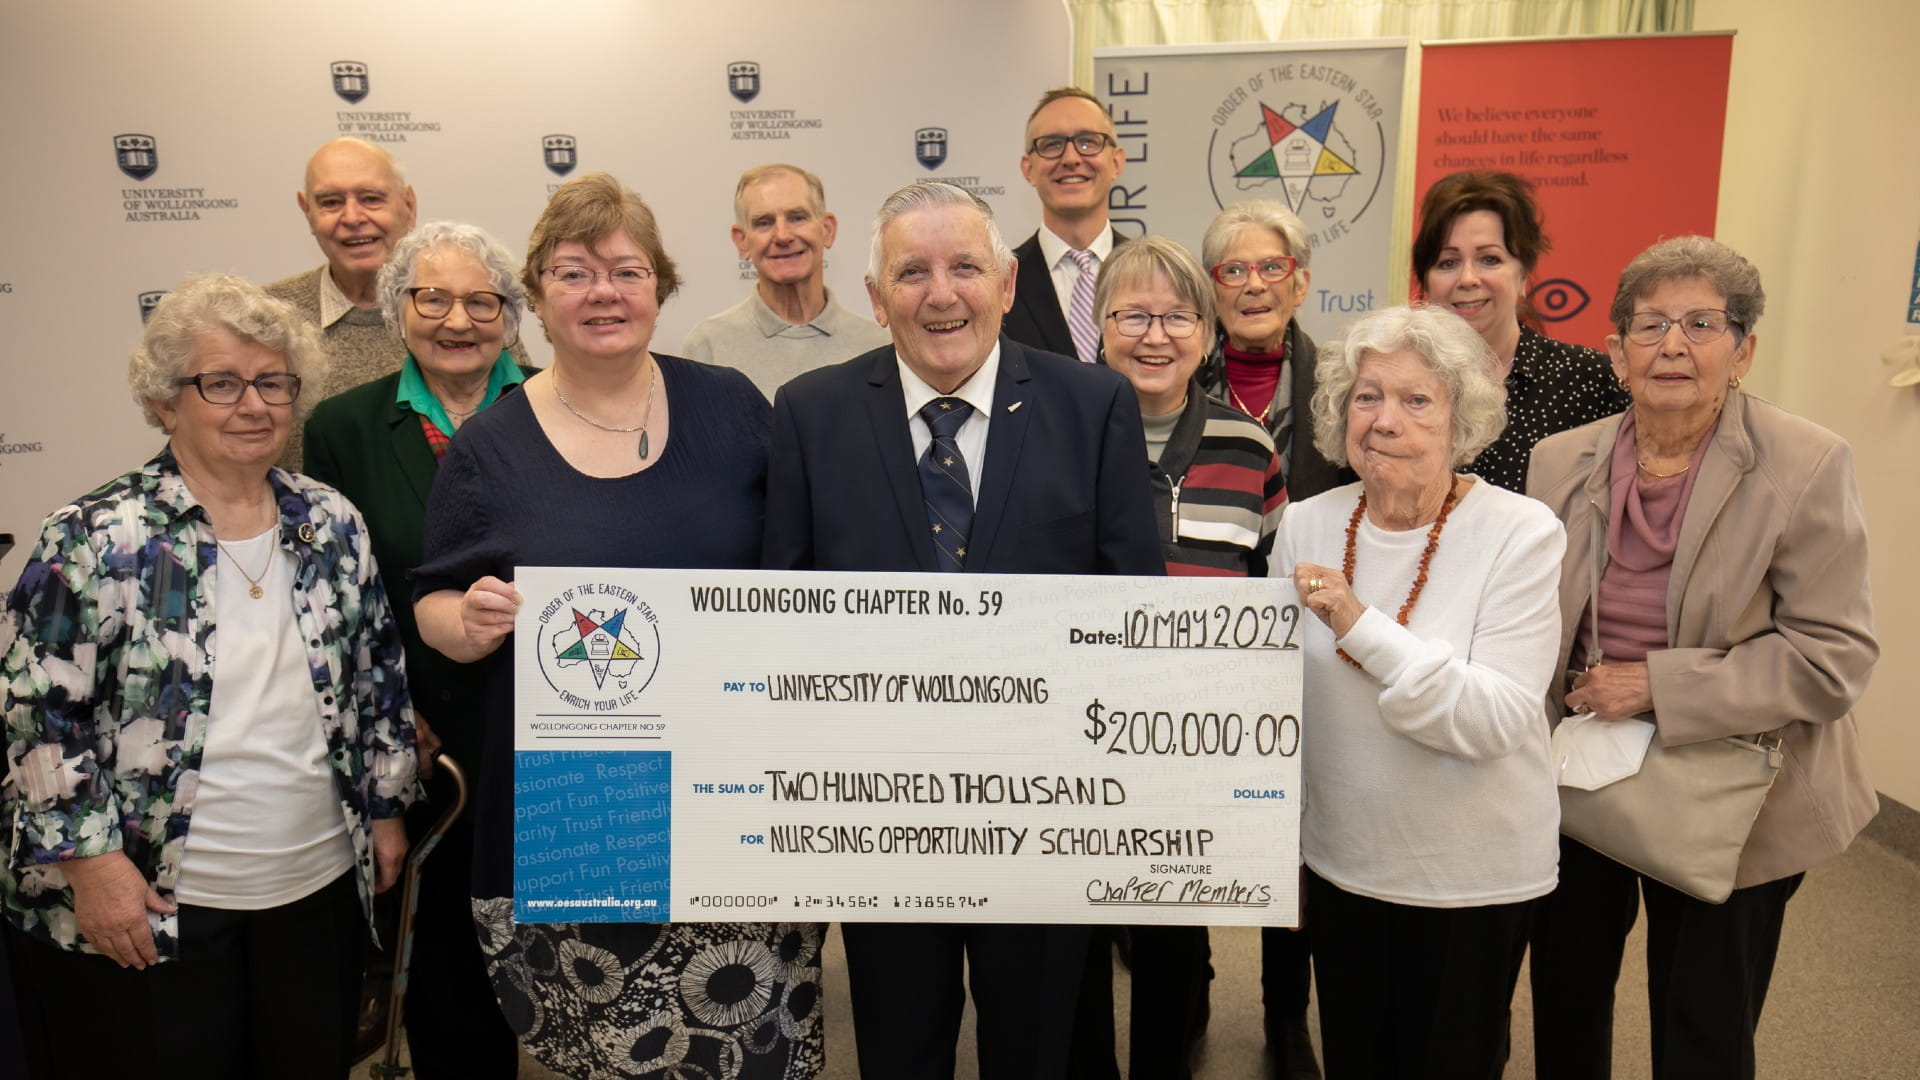 Members of the Order of the Eastern Star with representatives from UOW, hold a giant cheque at the scholarship launch. Photo: